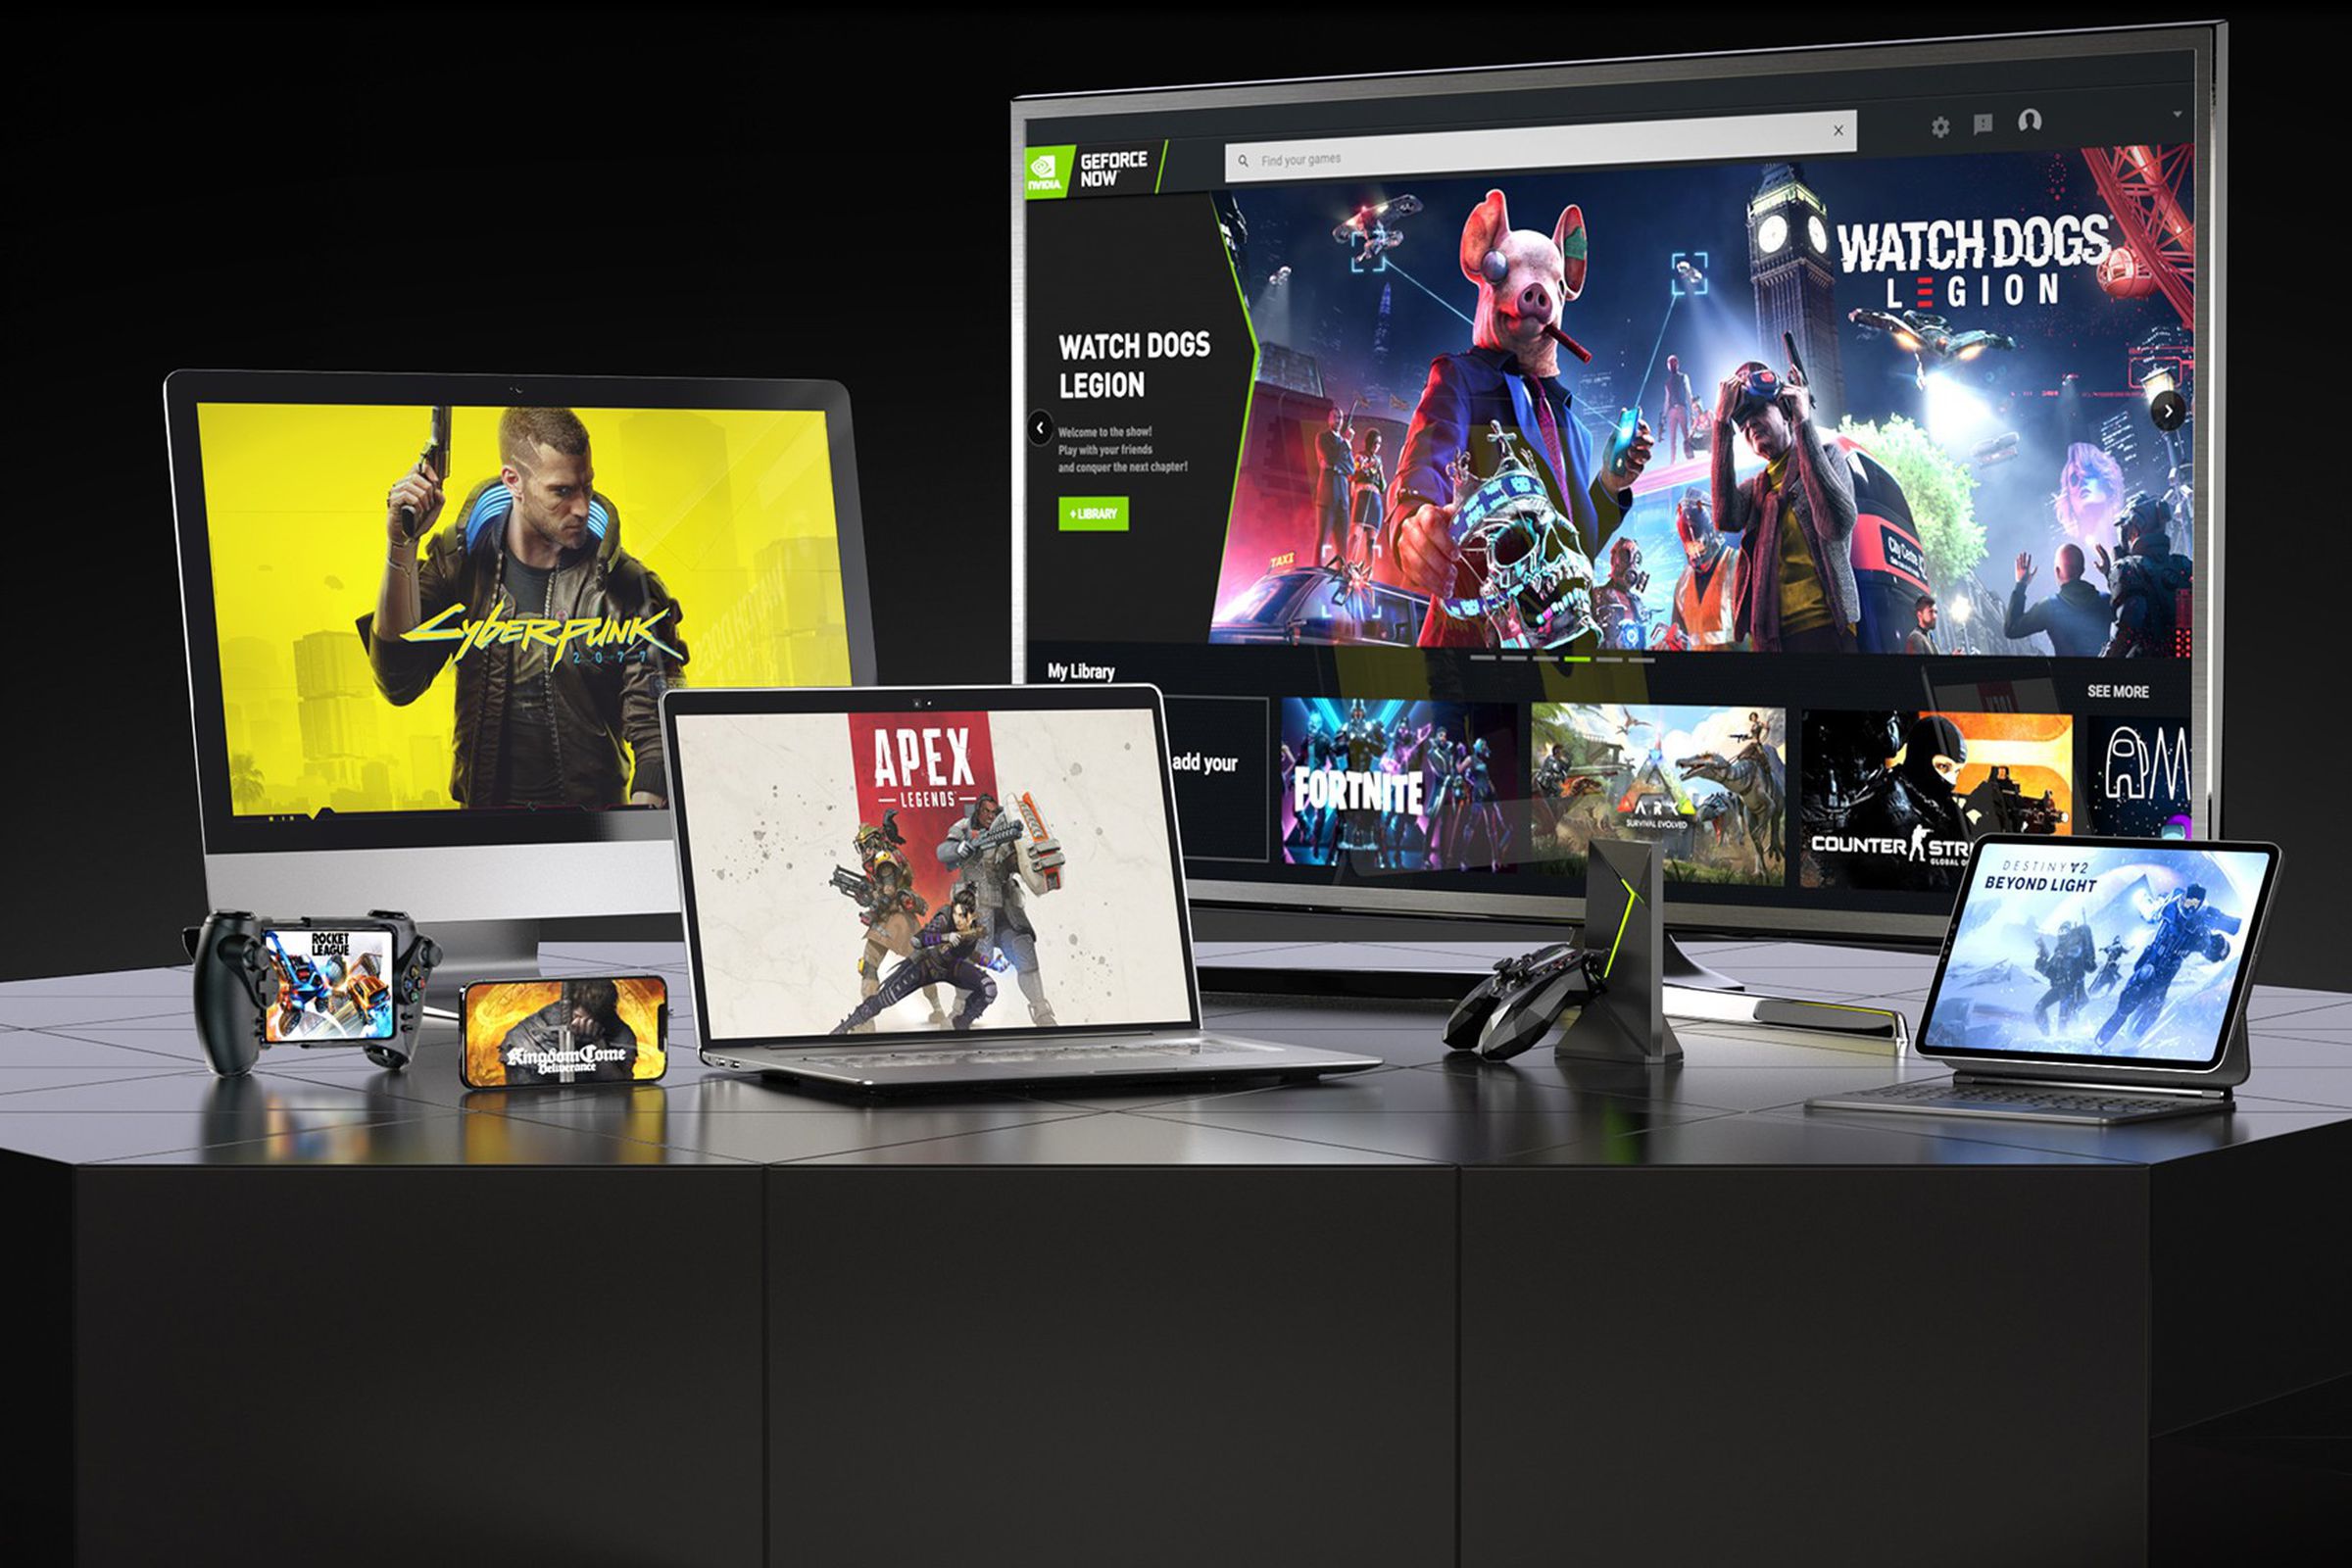 A selection of the devices GeForce Now streams to.